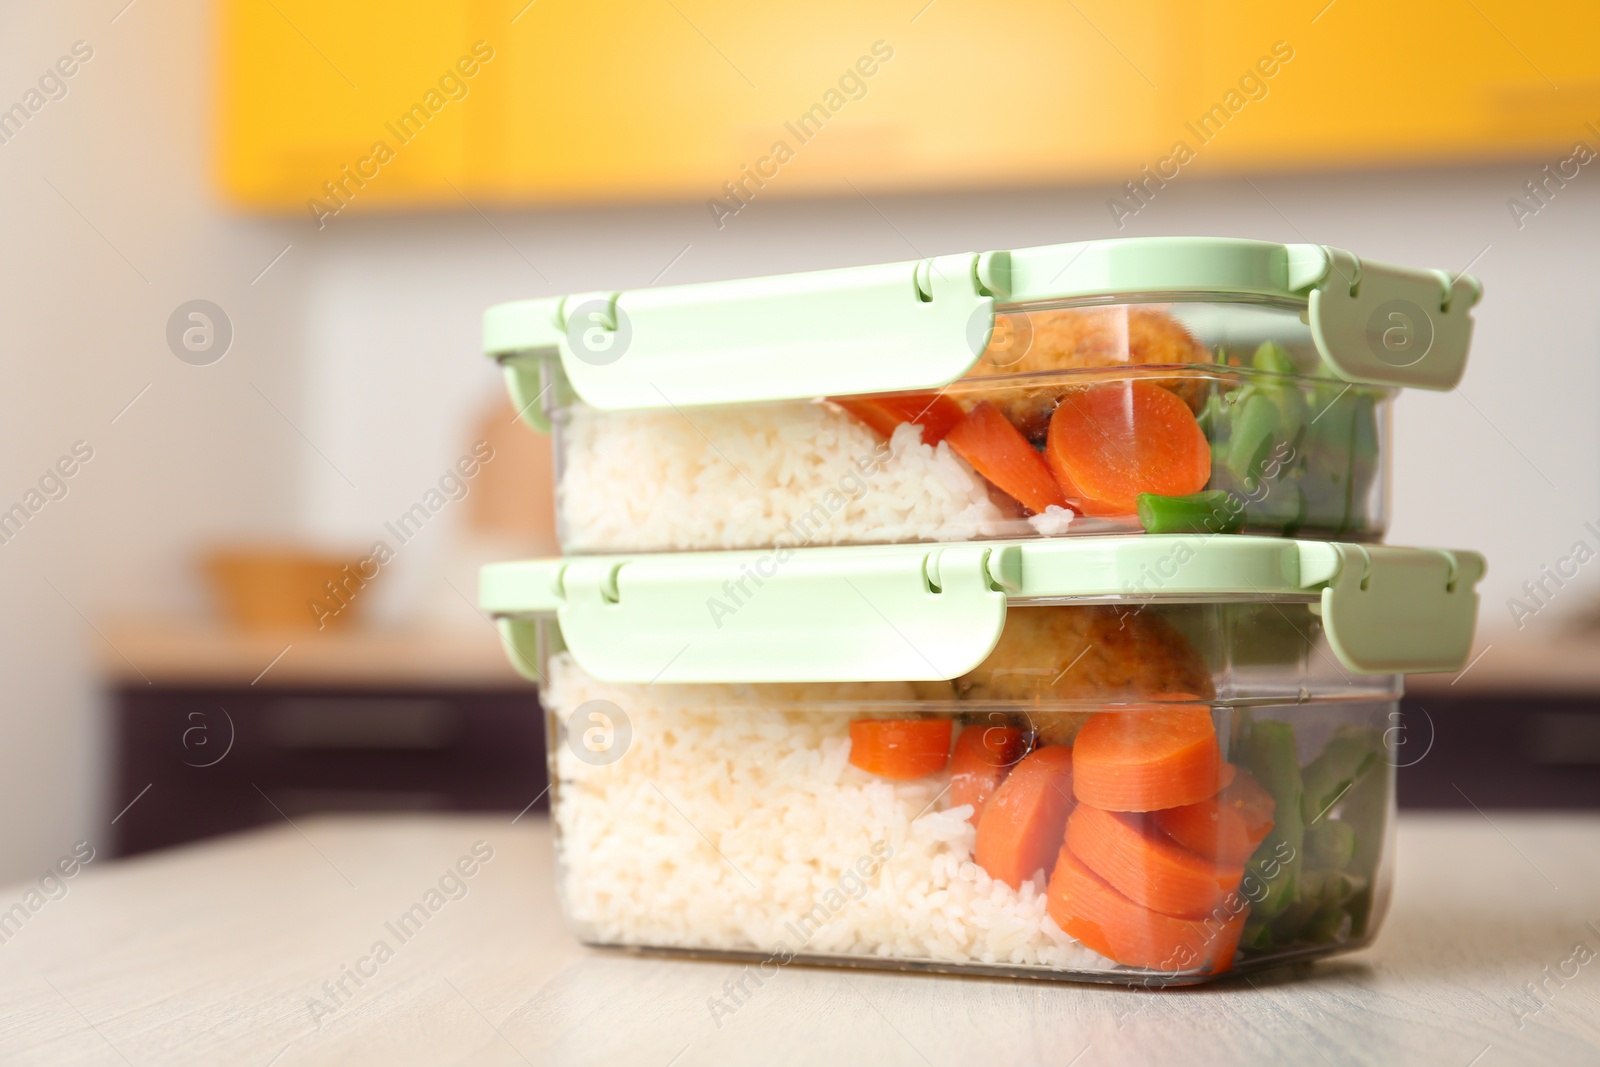 Photo of Boxes with prepared meals on table against blurred background